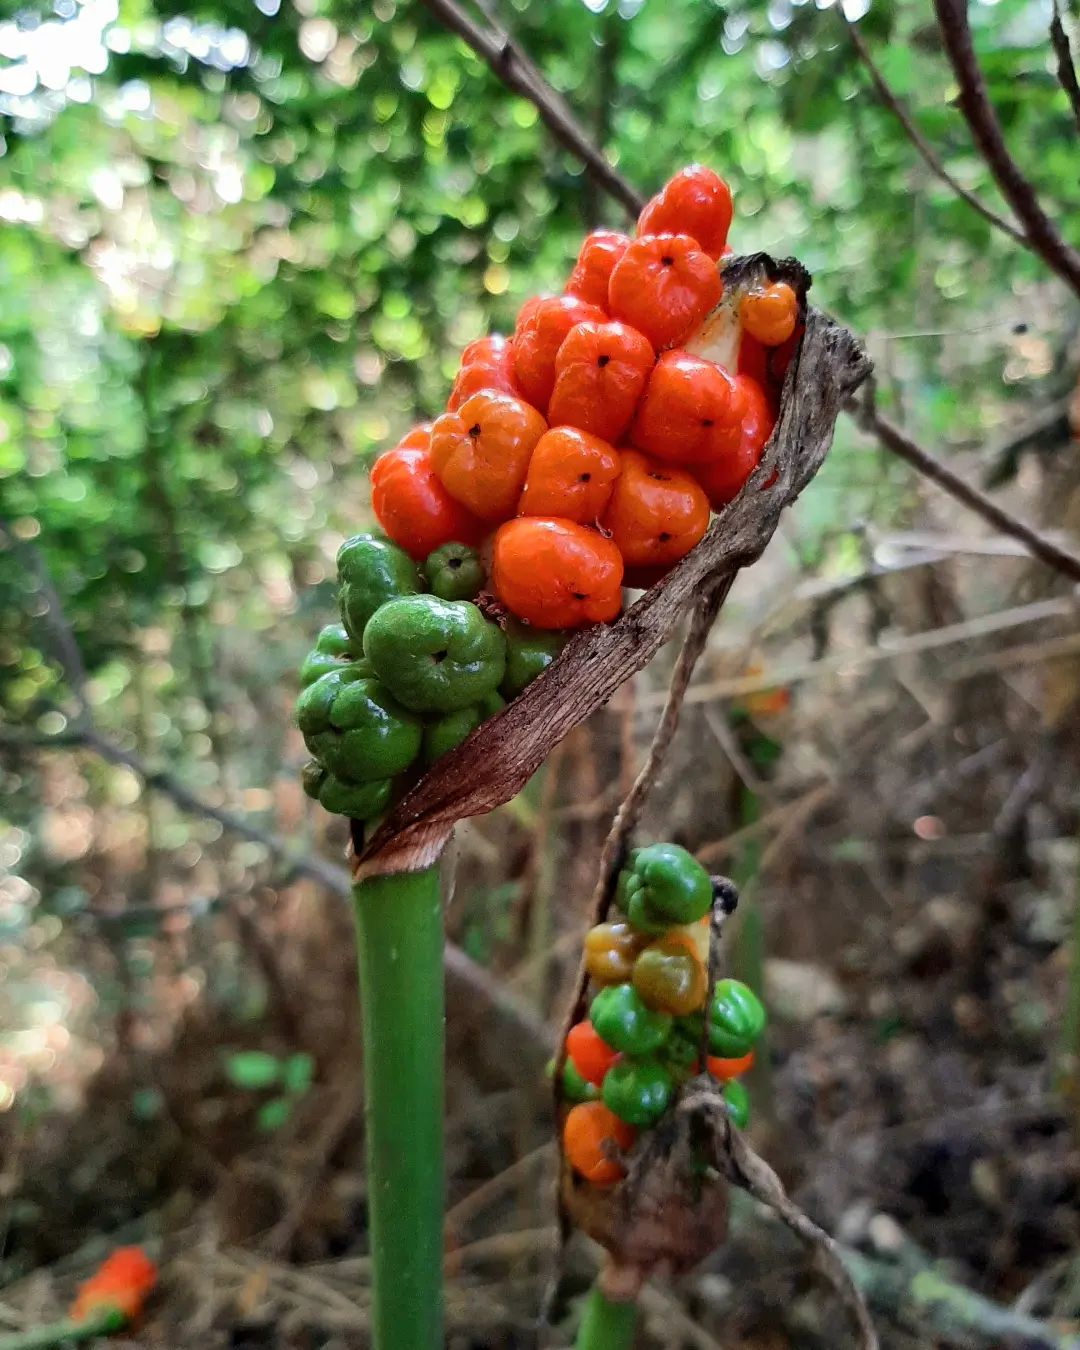 ---Germany--- The Cuckoopint (Arum maculatum) plant with the red, green or yellow berries, Eltenberg